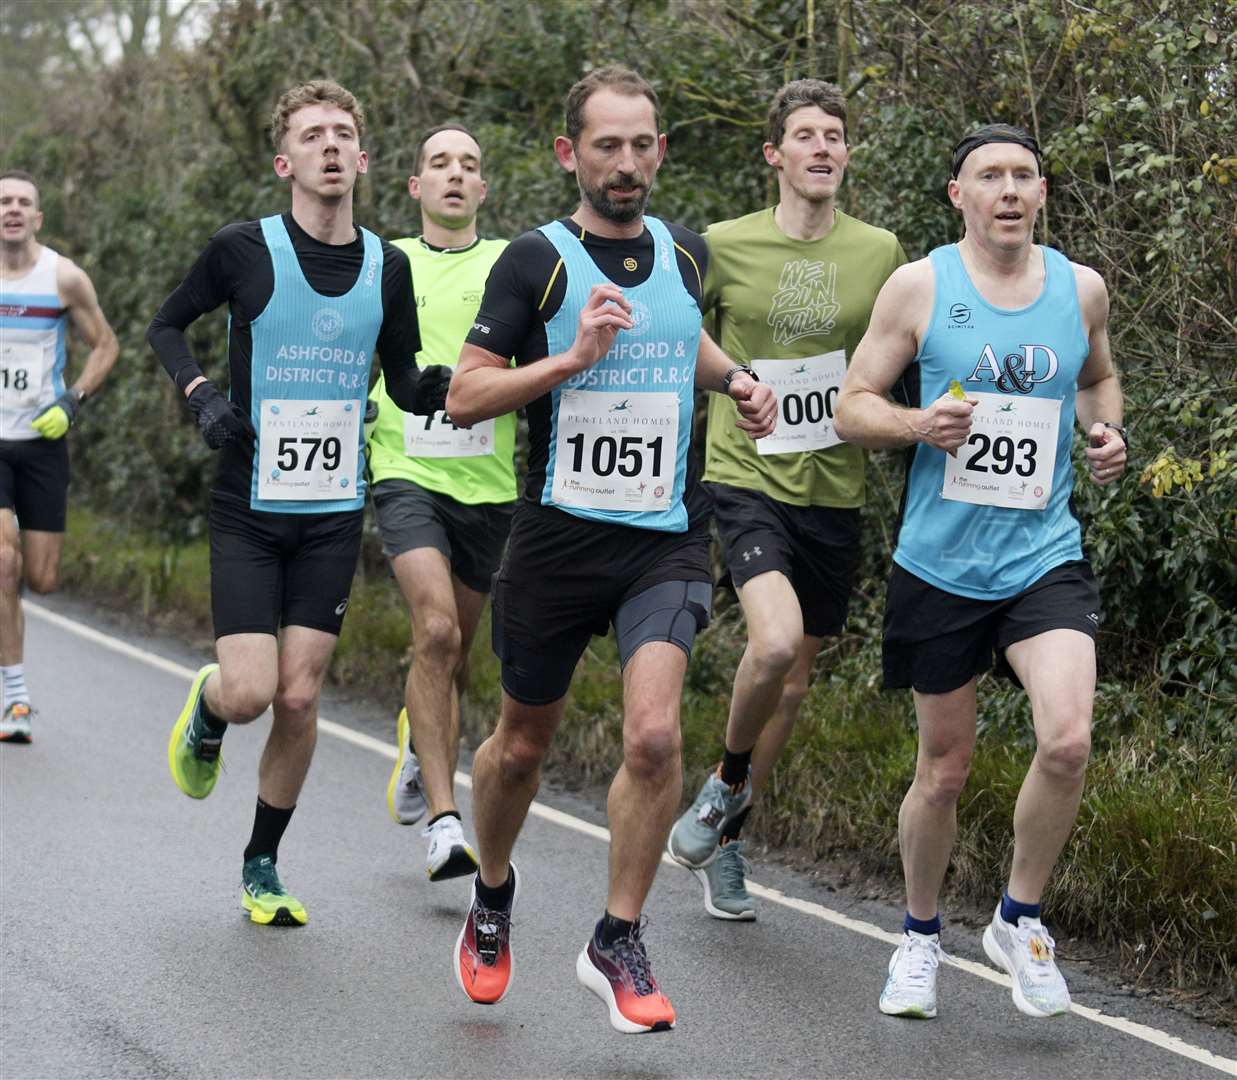 Ashford & District Road Running Club trio Jack Hodges (No.579), Luke Roberts (No.1051) and Paul Crisp (No.293). Picture: Barry Goodwin (62013881)